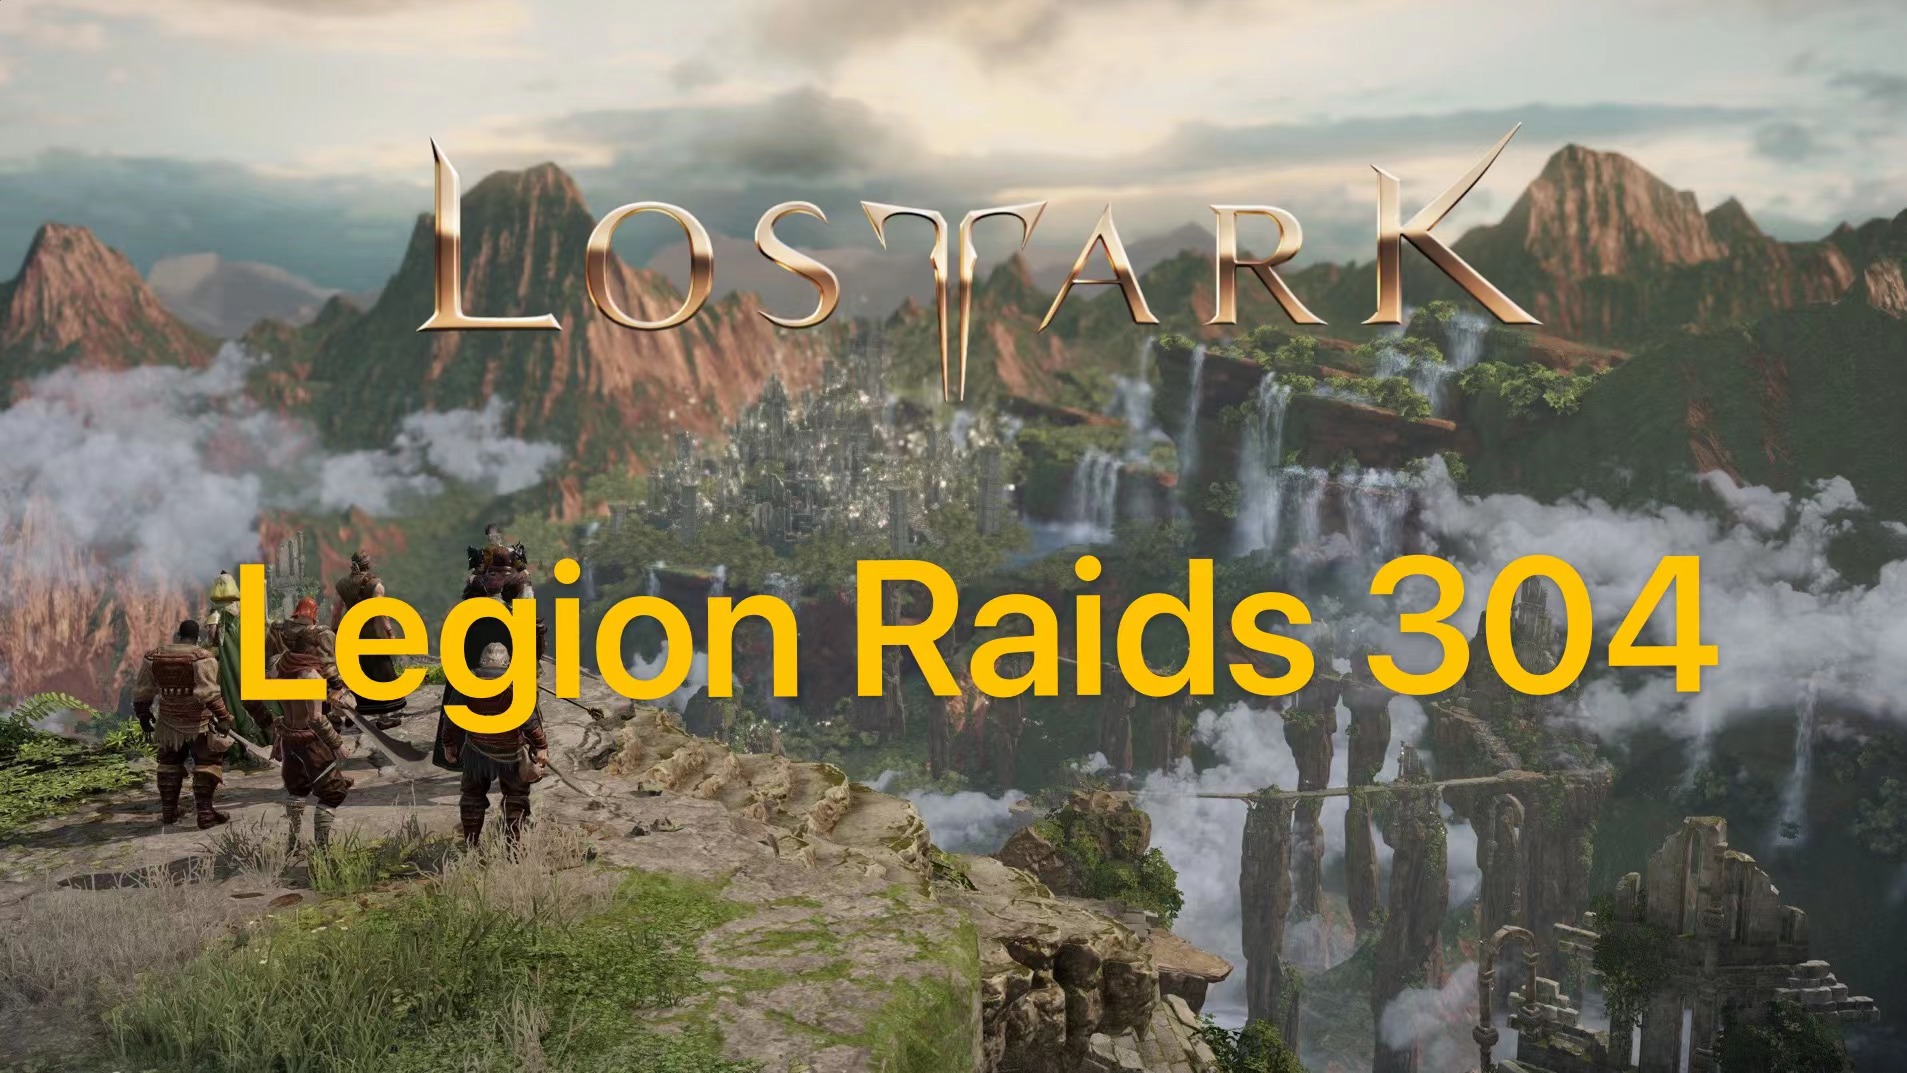 Lost Ark Legion Raids 304 Explained - A quick overview of the Legion Raid content in Lost Ark and unique systems related to it!